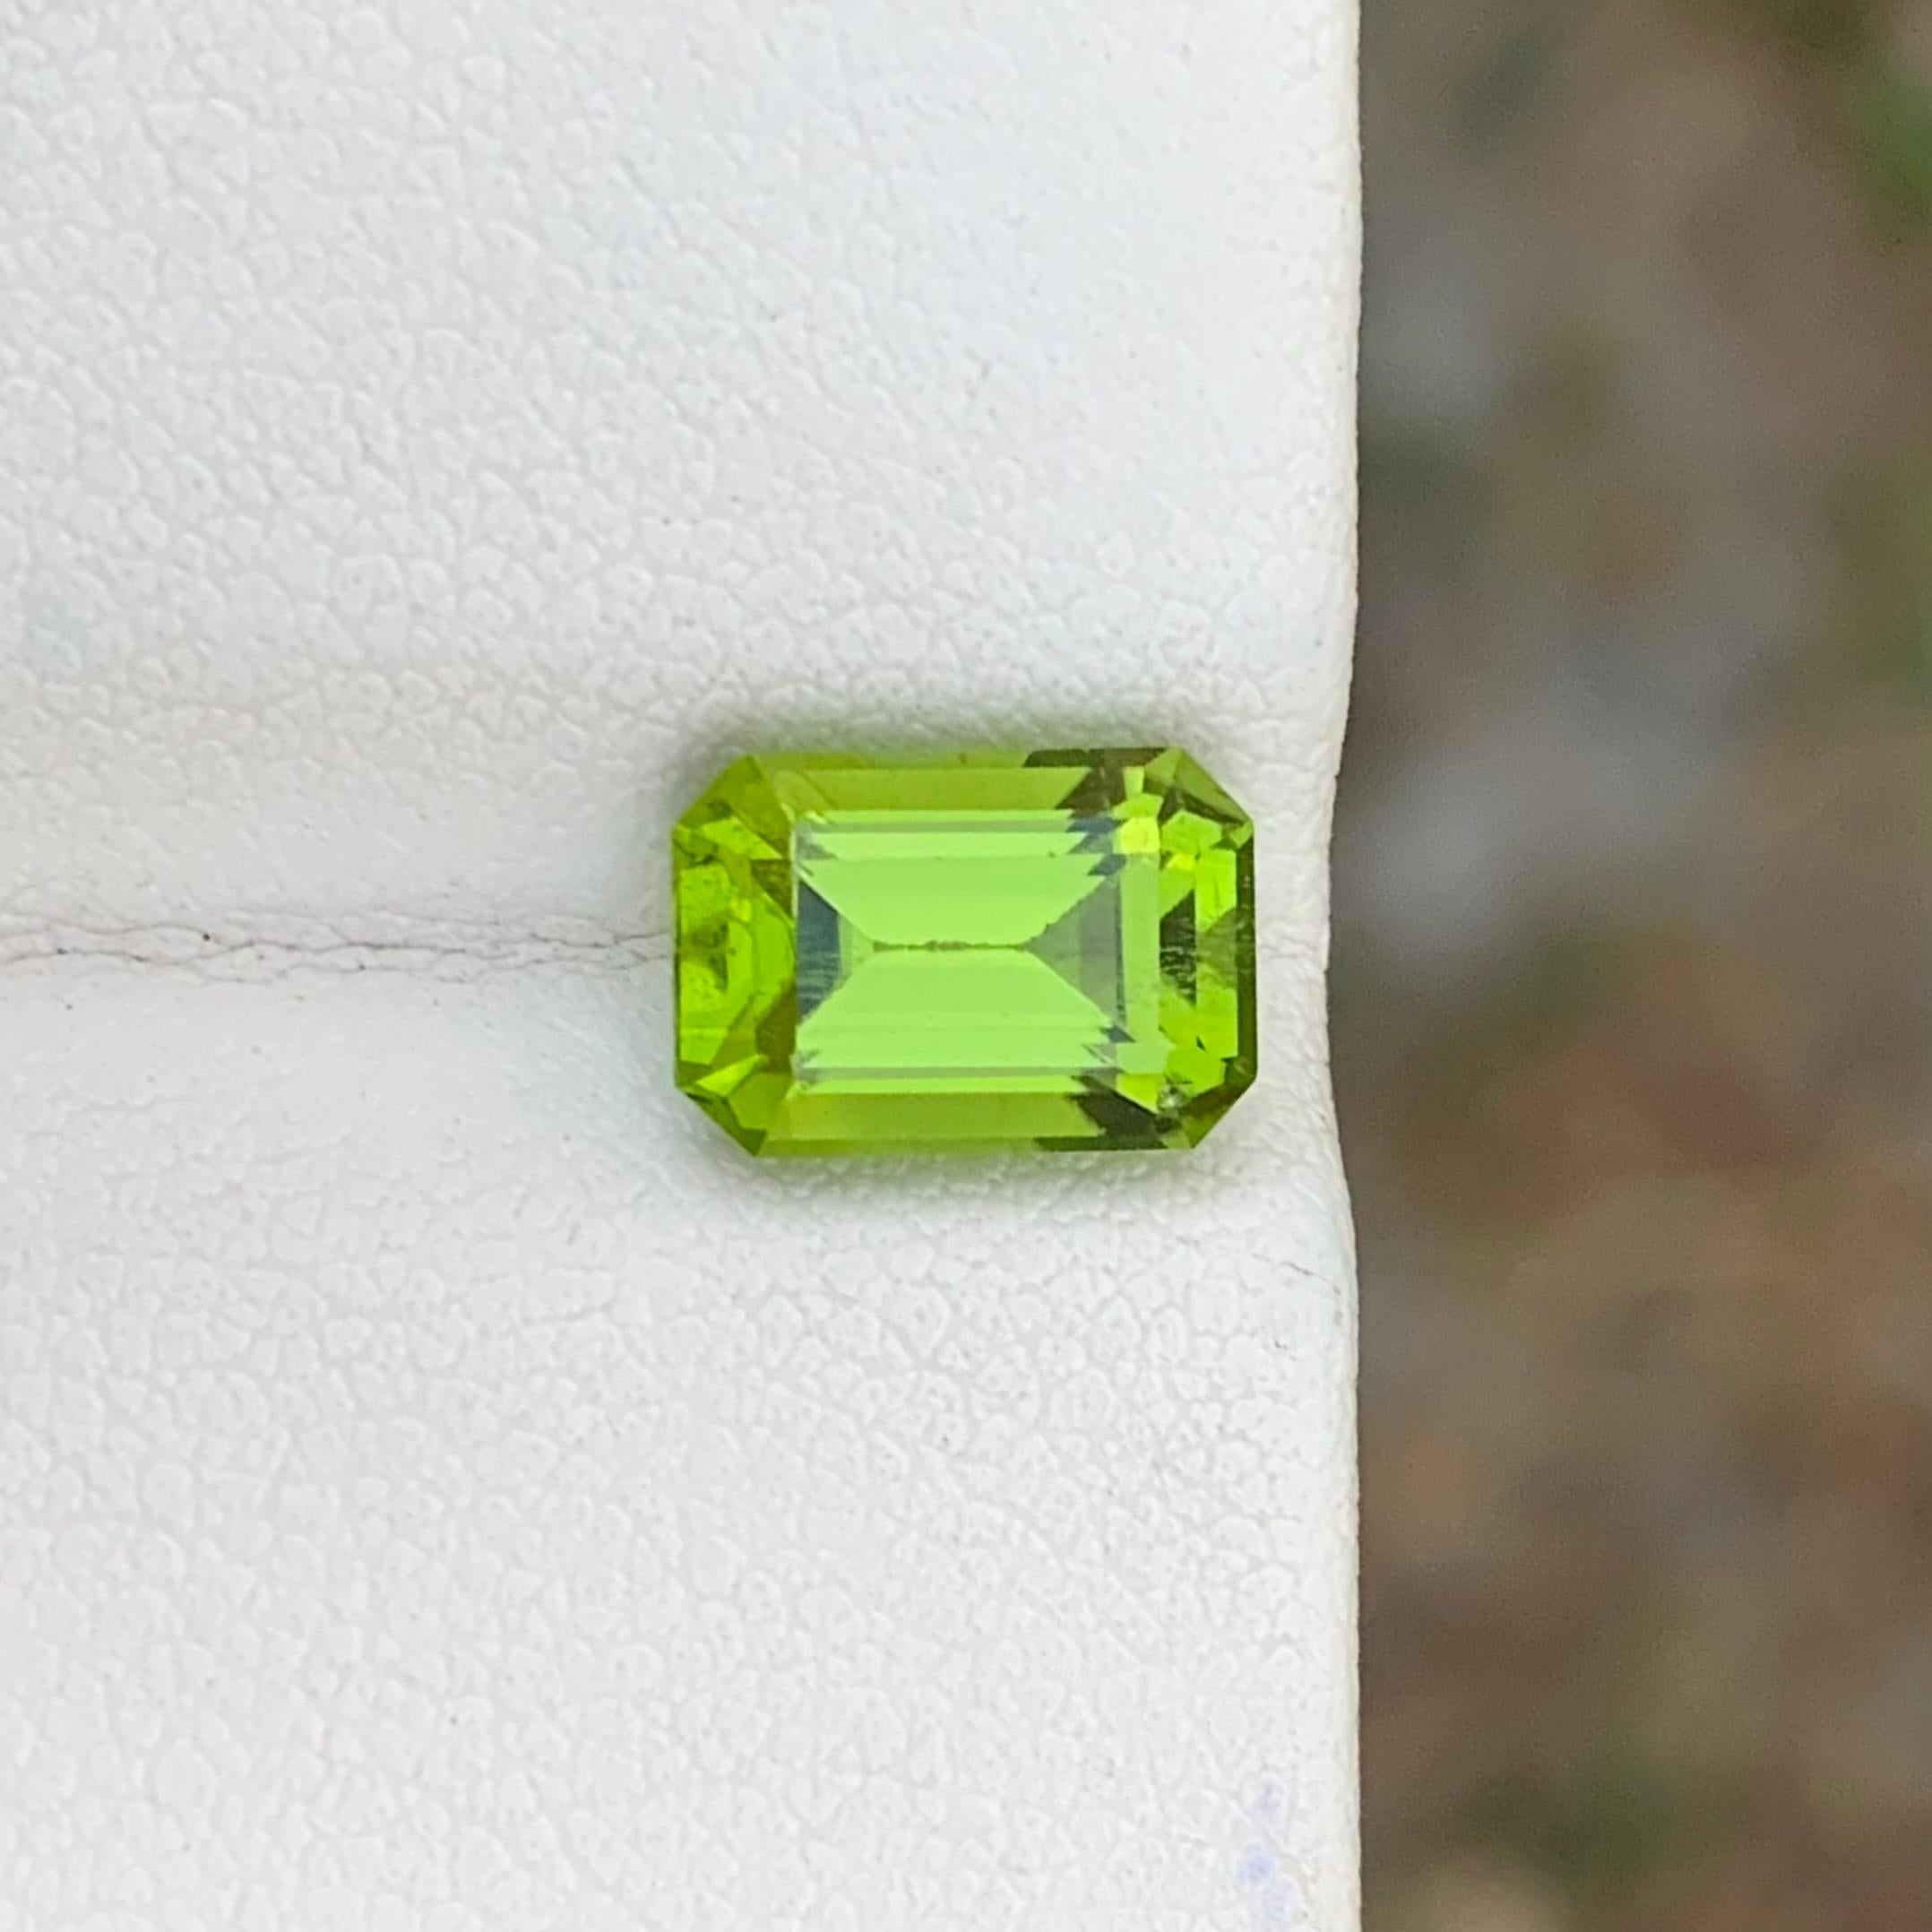 Loose Peridot
Weight: 2.70 Carats 
Dimension: 8.9x6.2x5.4 Mm
Origin: Pakistan
Shape: Emerald 
Color: Green
Treatment: Non
Peridot is a stunning green gemstone known for its vibrant color and unique properties. This gem belongs to the mineral